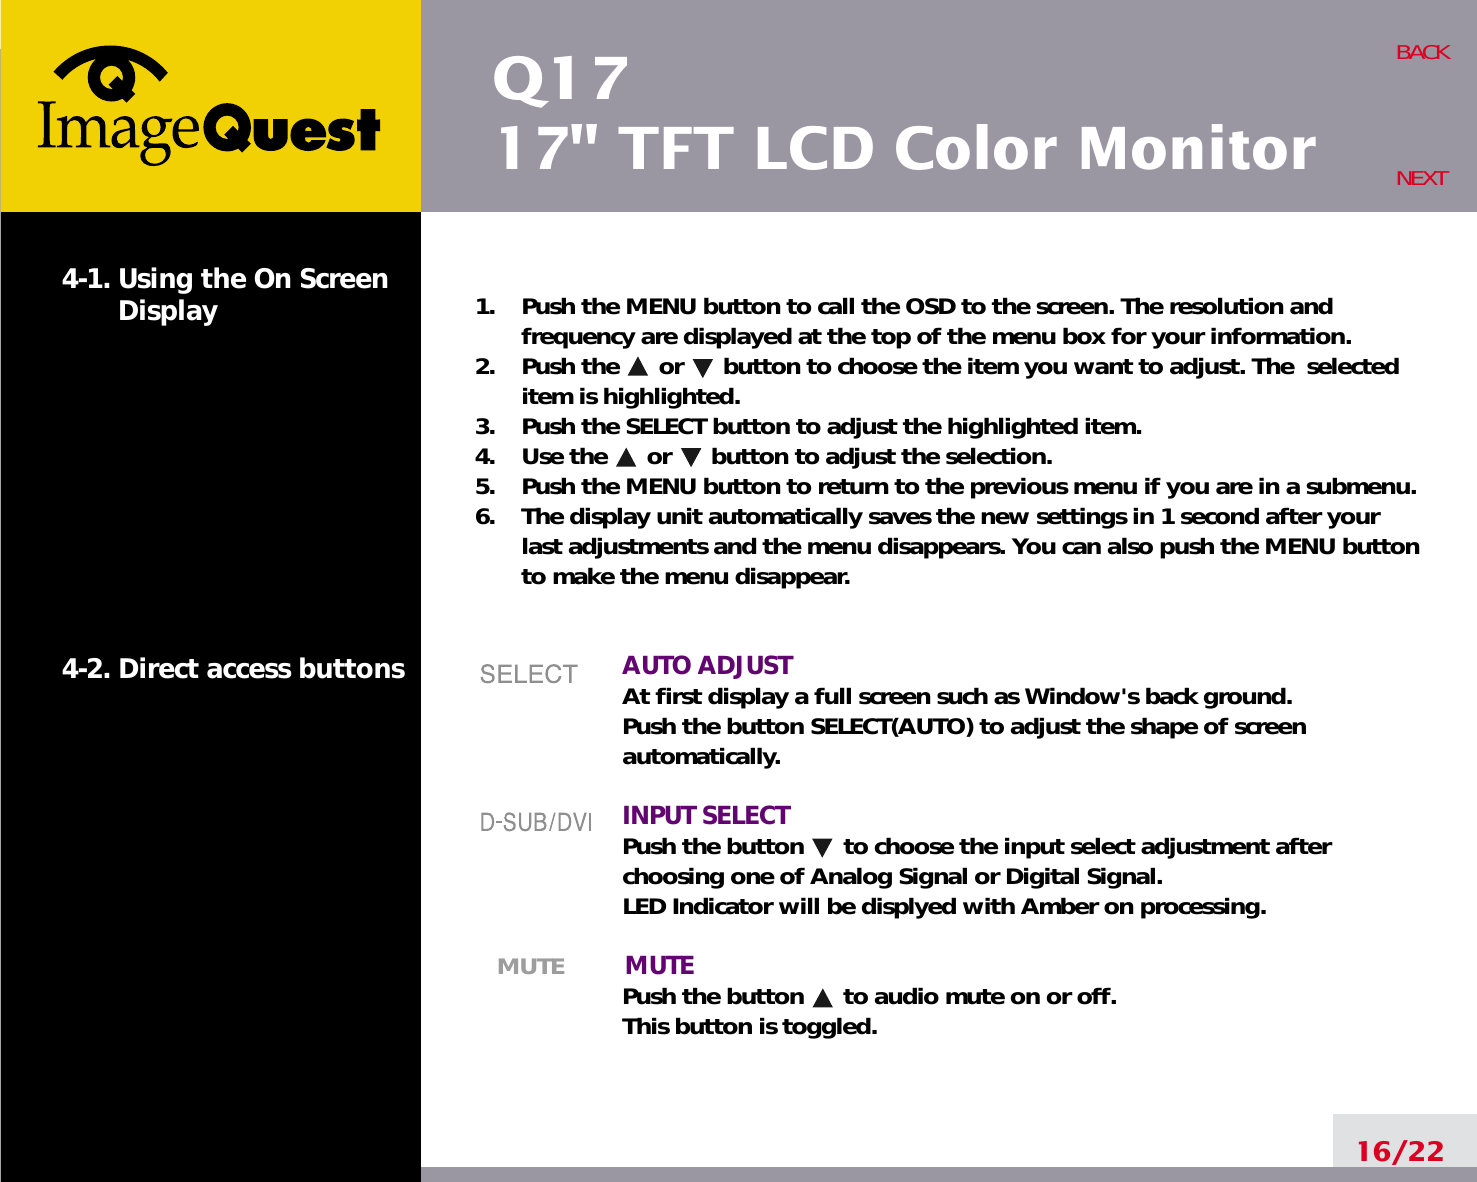 Q1717&quot; TFT LCD Color Monitor16/22BACKNEXT1.    Push the MENU button to call the OSD to the screen. The resolution andfrequency are displayed at the top of the menu box for your information.2.    Push the      or      button to choose the item you want to adjust. The  selecteditem is highlighted.3.    Push the SELECT button to adjust the highlighted item. 4.    Use the      or      button to adjust the selection.5.    Push the MENU button to return to the previous menu if you are in a submenu.6.    The display unit automatically saves the new settings in 1 second after yourlast adjustments and the menu disappears. You can also push the MENU buttonto make the menu disappear.AUTO ADJUSTAt first display a full screen such as Window&apos;s back ground.Push the button SELECT(AUTO) to adjust the shape of screenautomatically.INPUT SELECTPush the button      to choose the input select adjustment afterchoosing one of Analog Signal or Digital Signal.LED Indicator will be displyed with Amber on processing.MUTE MUTEPush the button      to audio mute on or off.This button is toggled.4-1. Using the On ScreenDisplay 4-2. Direct access buttons